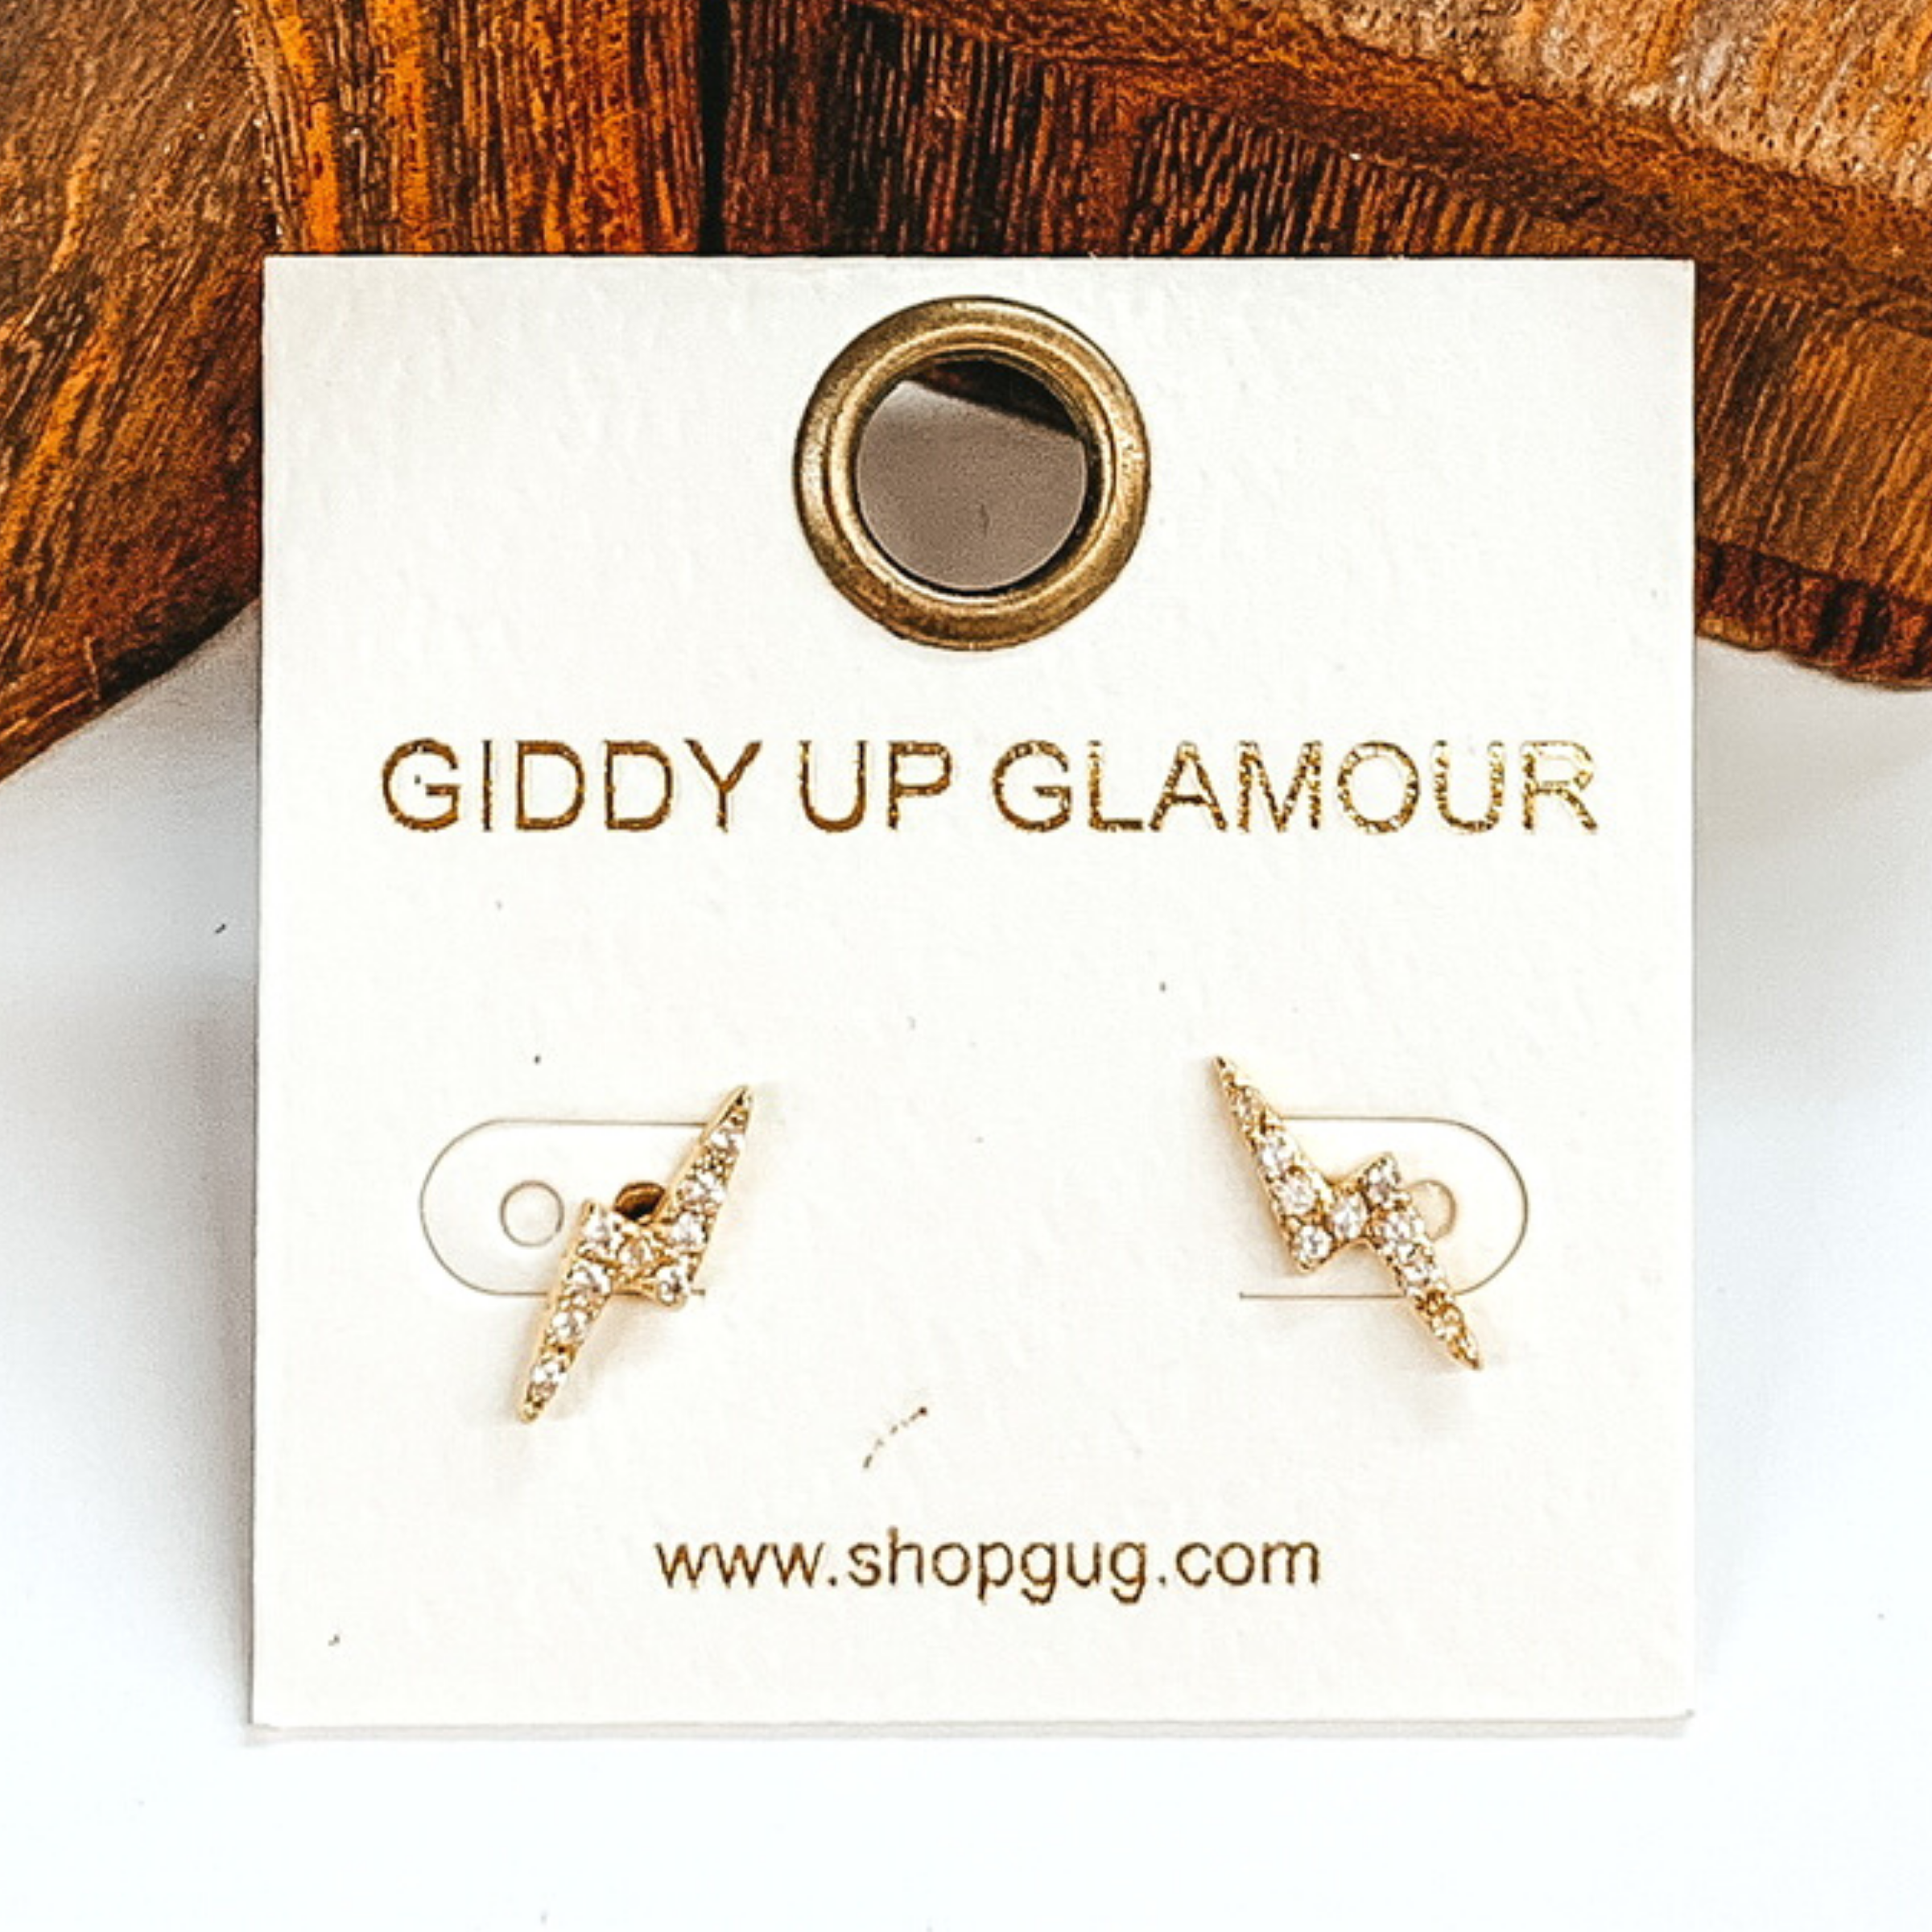 Small, gold thunder bolt stud earrings with clear crystals. These earrings are pictured on a white earrings card on a white and brown background.